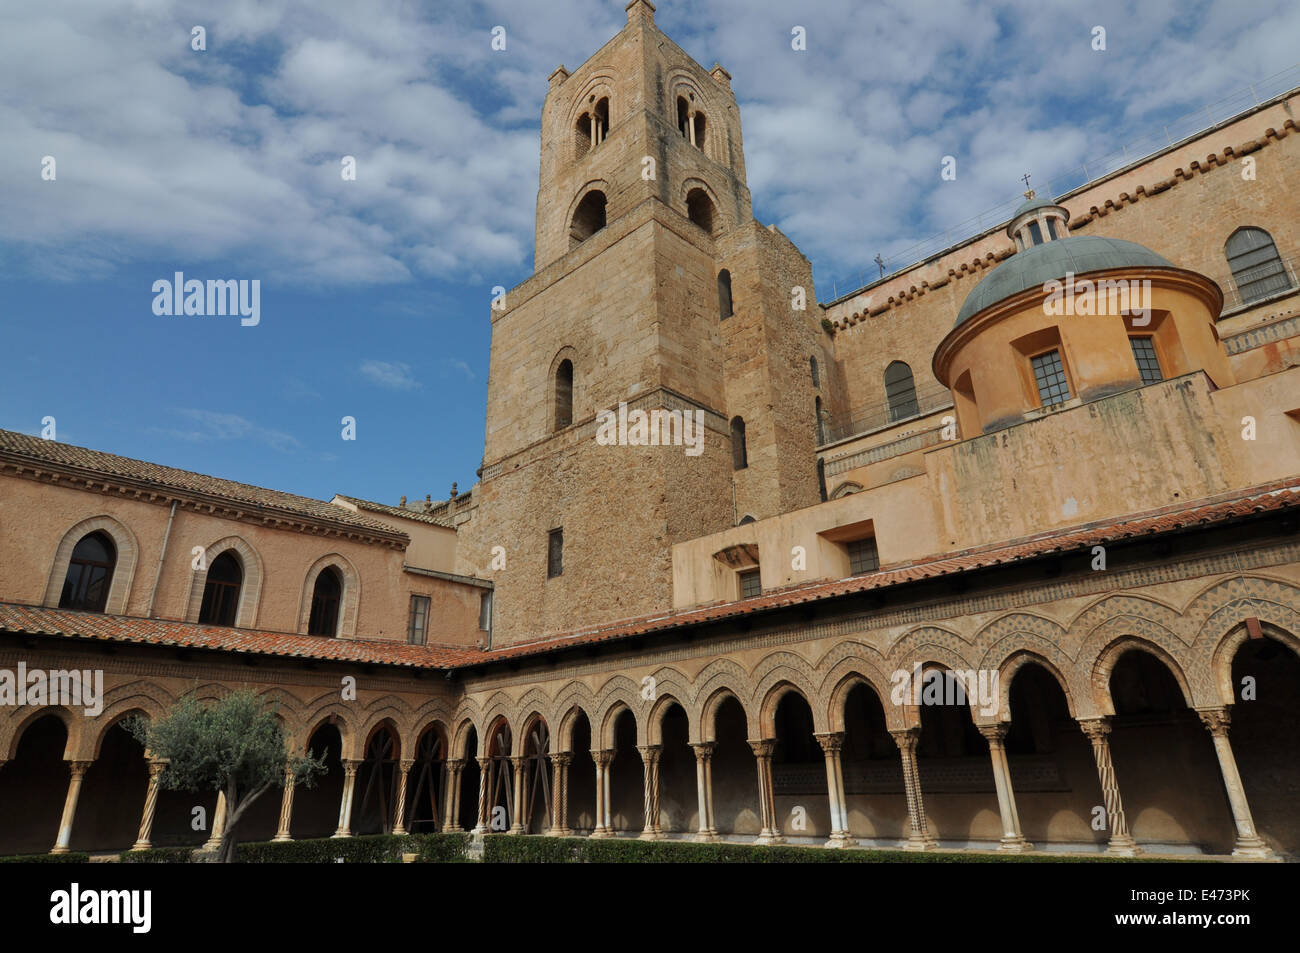 Monreale, cloister of the cathedral, Palermo, Sicily, Italy, Europe Stock Photo